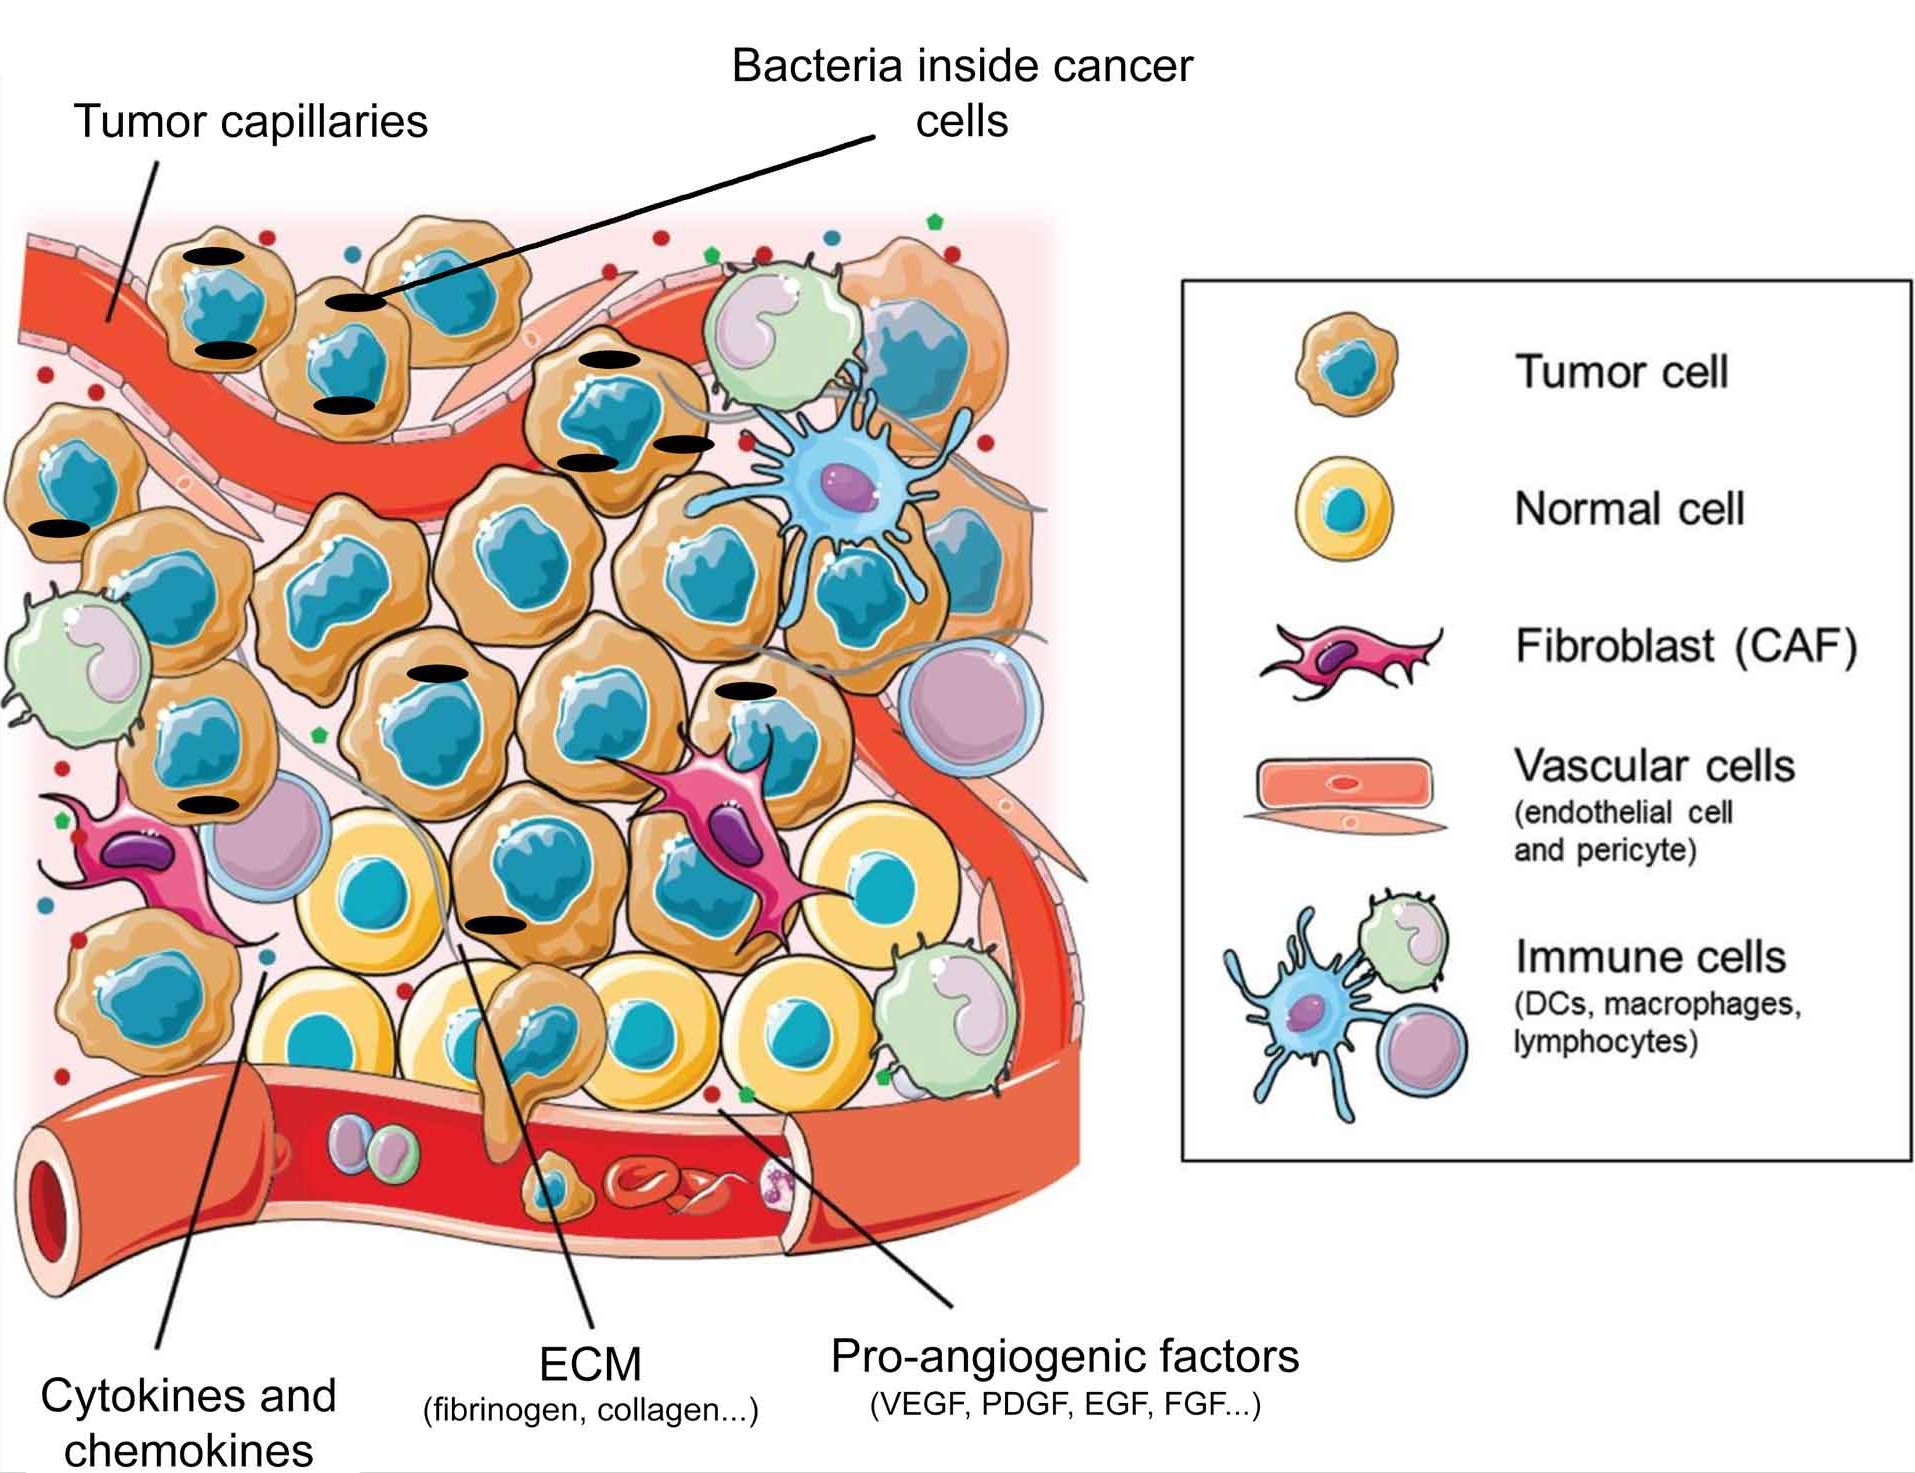 T Cell lymphocyte with receptors for cancer cell immunotherapy research.